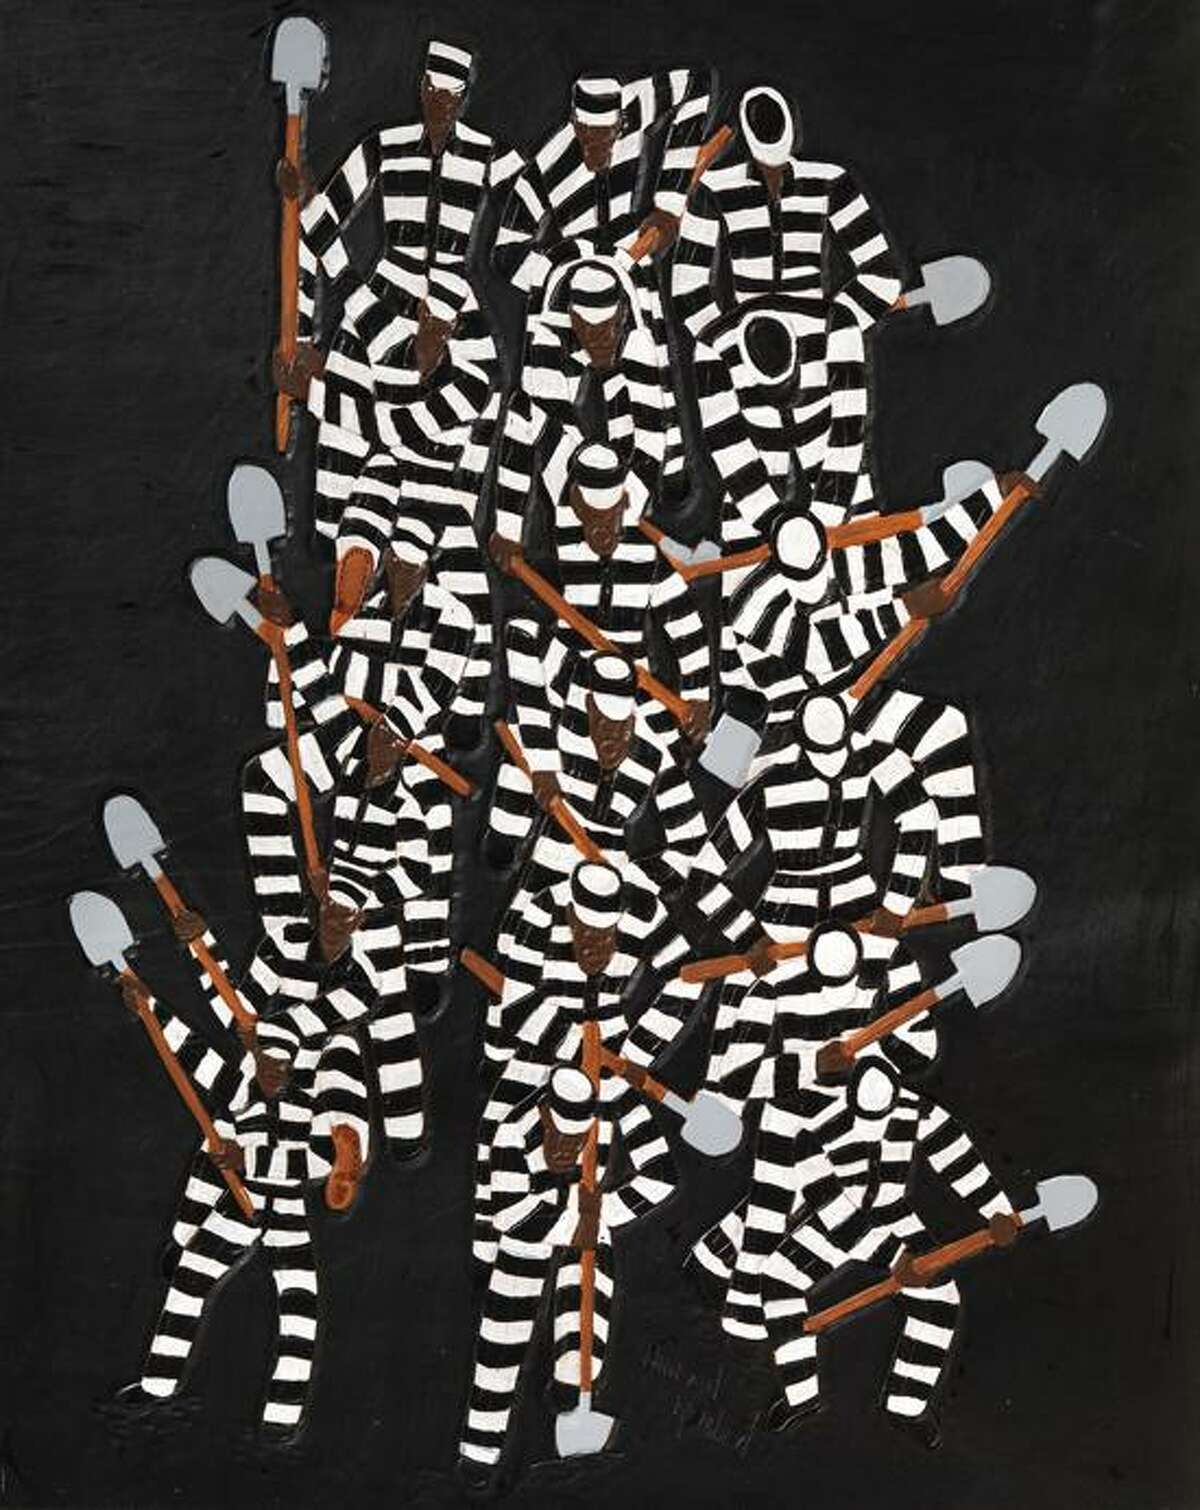 Adelson Galleries photo: Rembert's "Chain Gang - The Ditch" is one of many paintings on the subject.